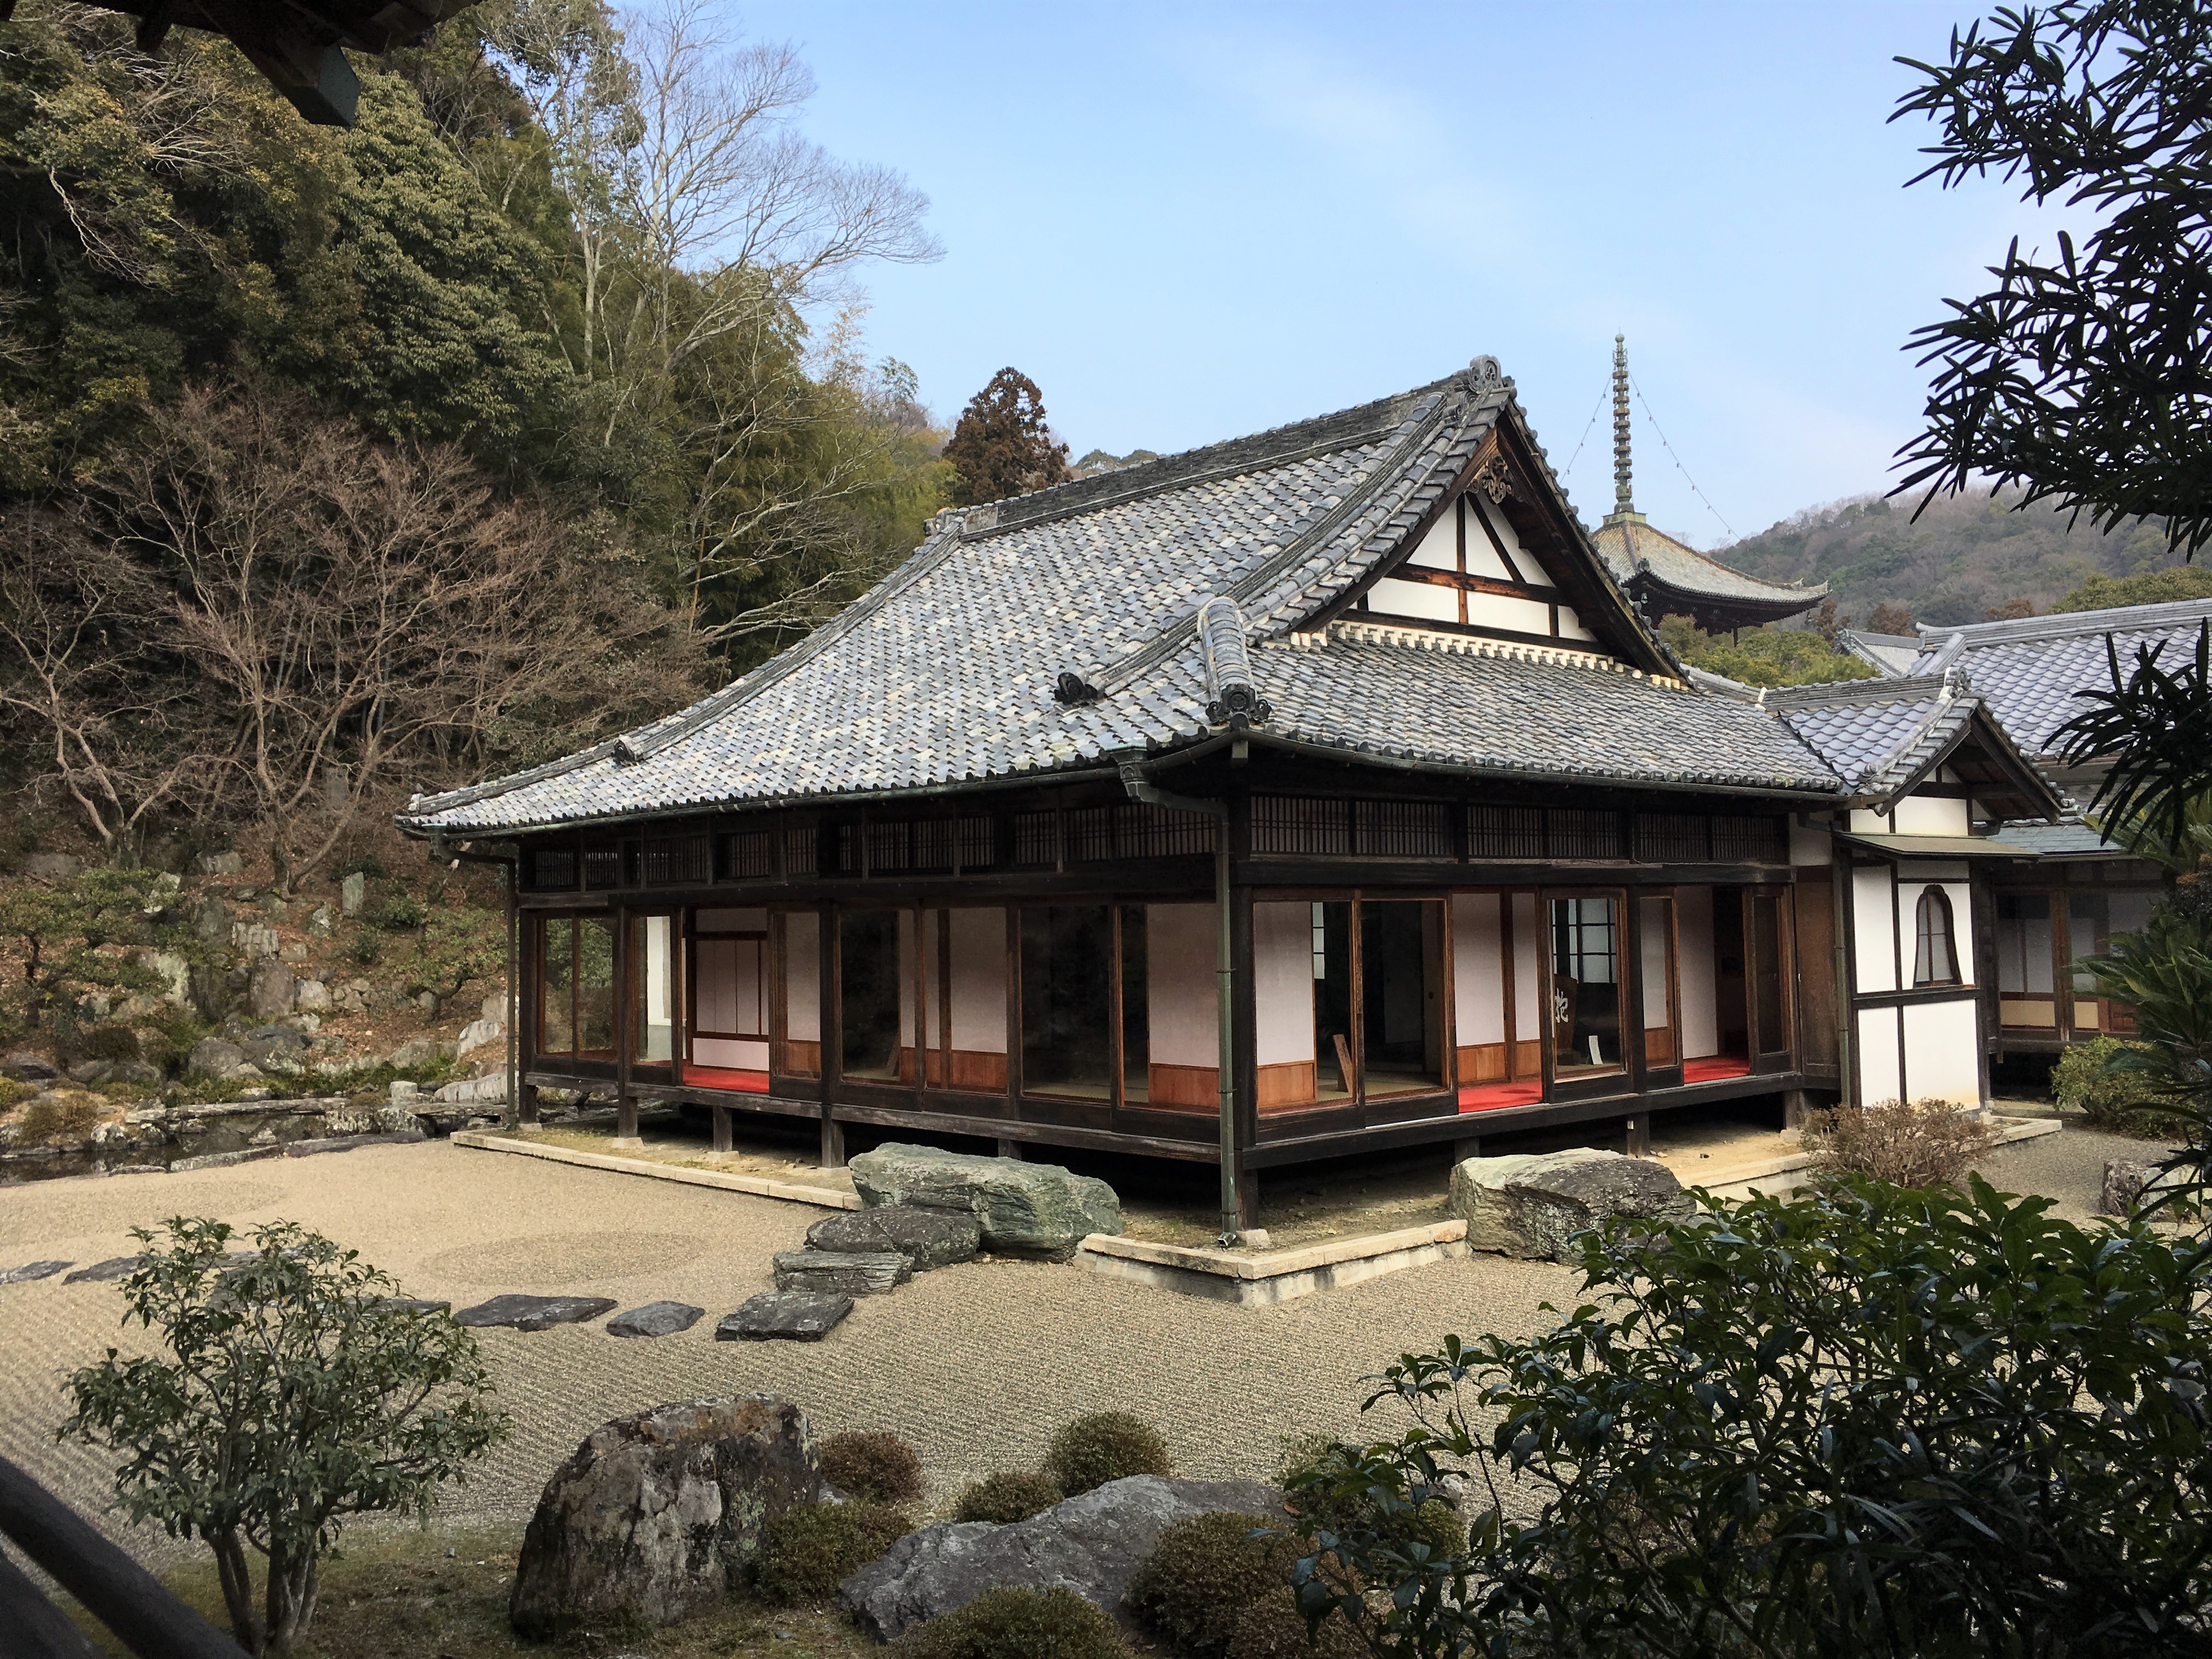 small traditional Japanese style building in a stone garden